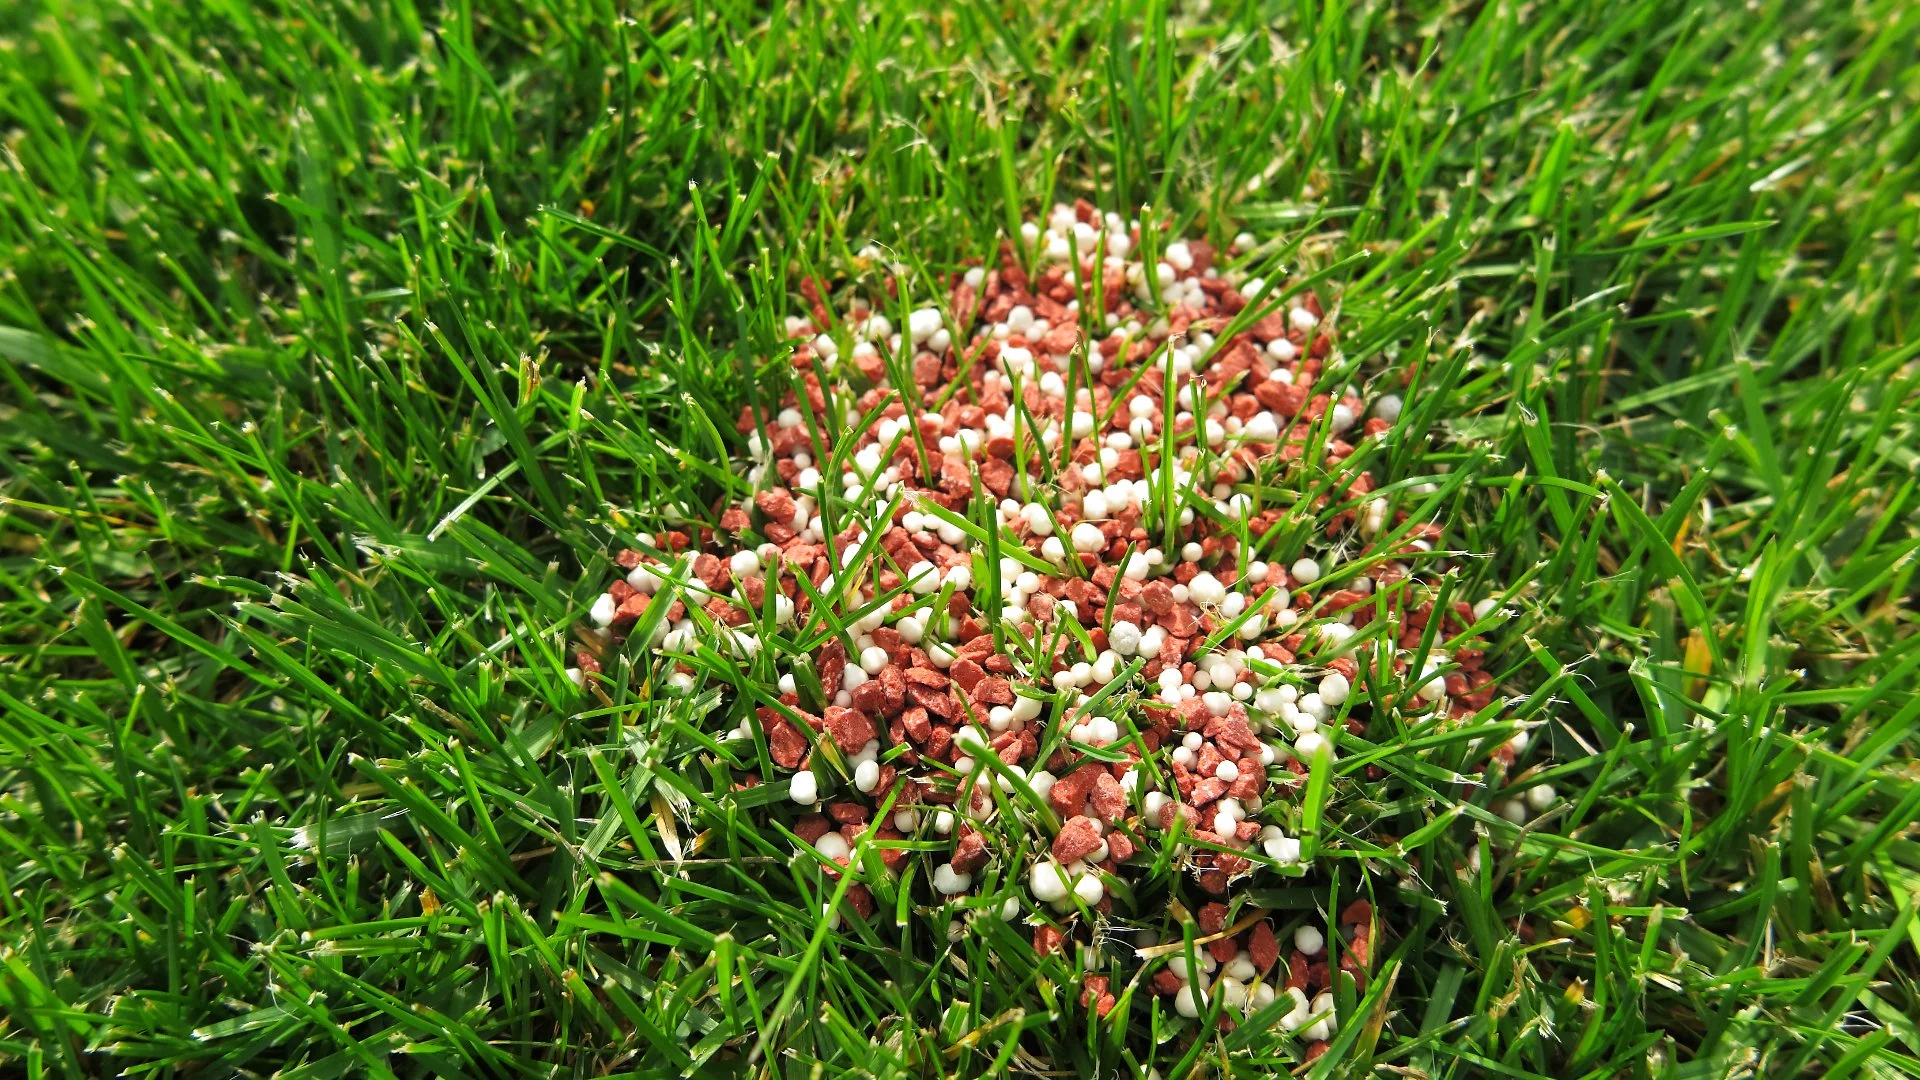 Are There Any Reasons That I Shouldn’t Fertilize My Own Lawn?